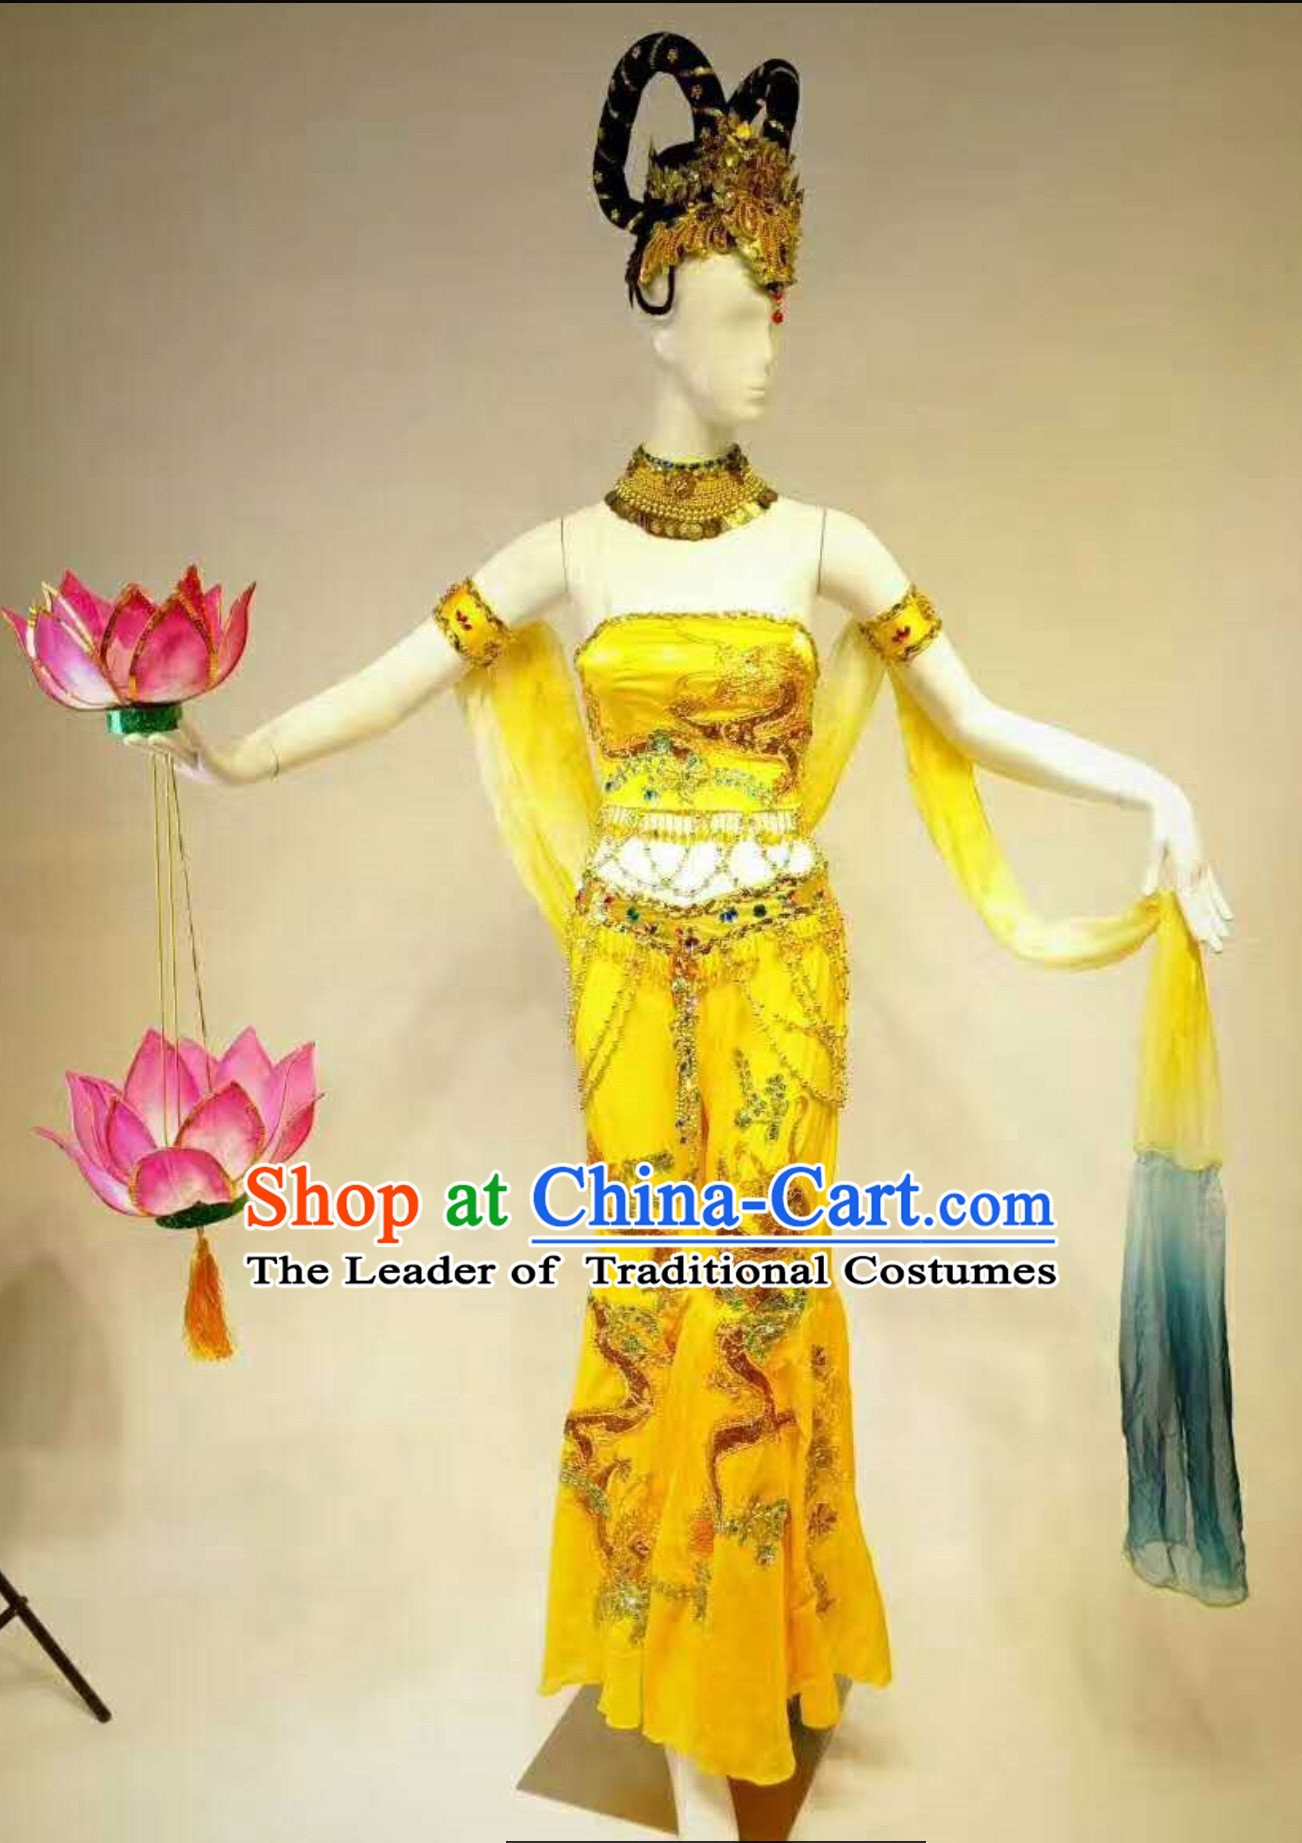 Professional Stage Performance Costumes Made to Order Custom Tailored Dance Costume, Lotus Props and Classical Headpieces Hair Accessories